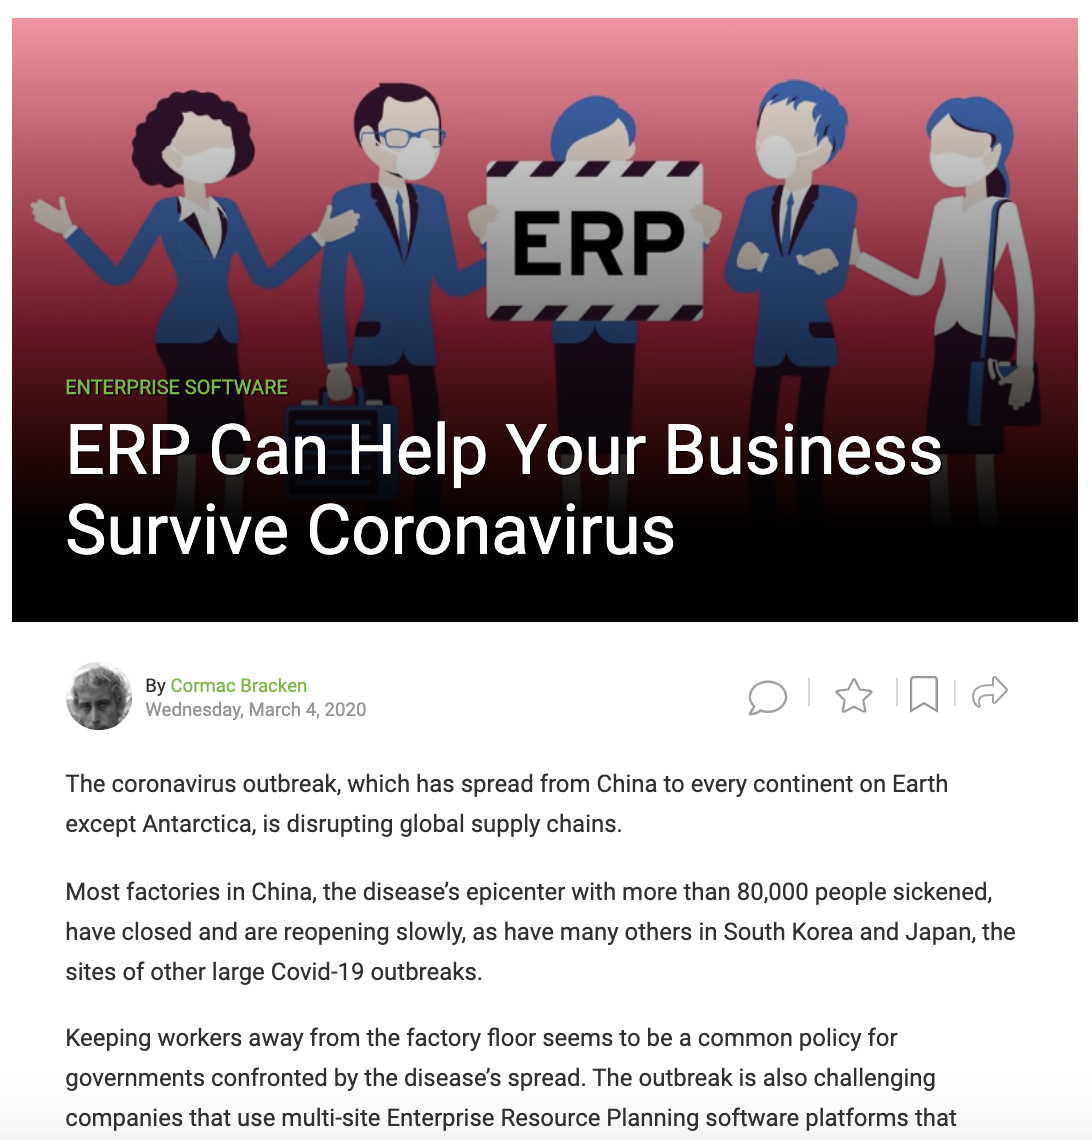 Toolbox.com article on how ERP can help businesses survive coronavirus